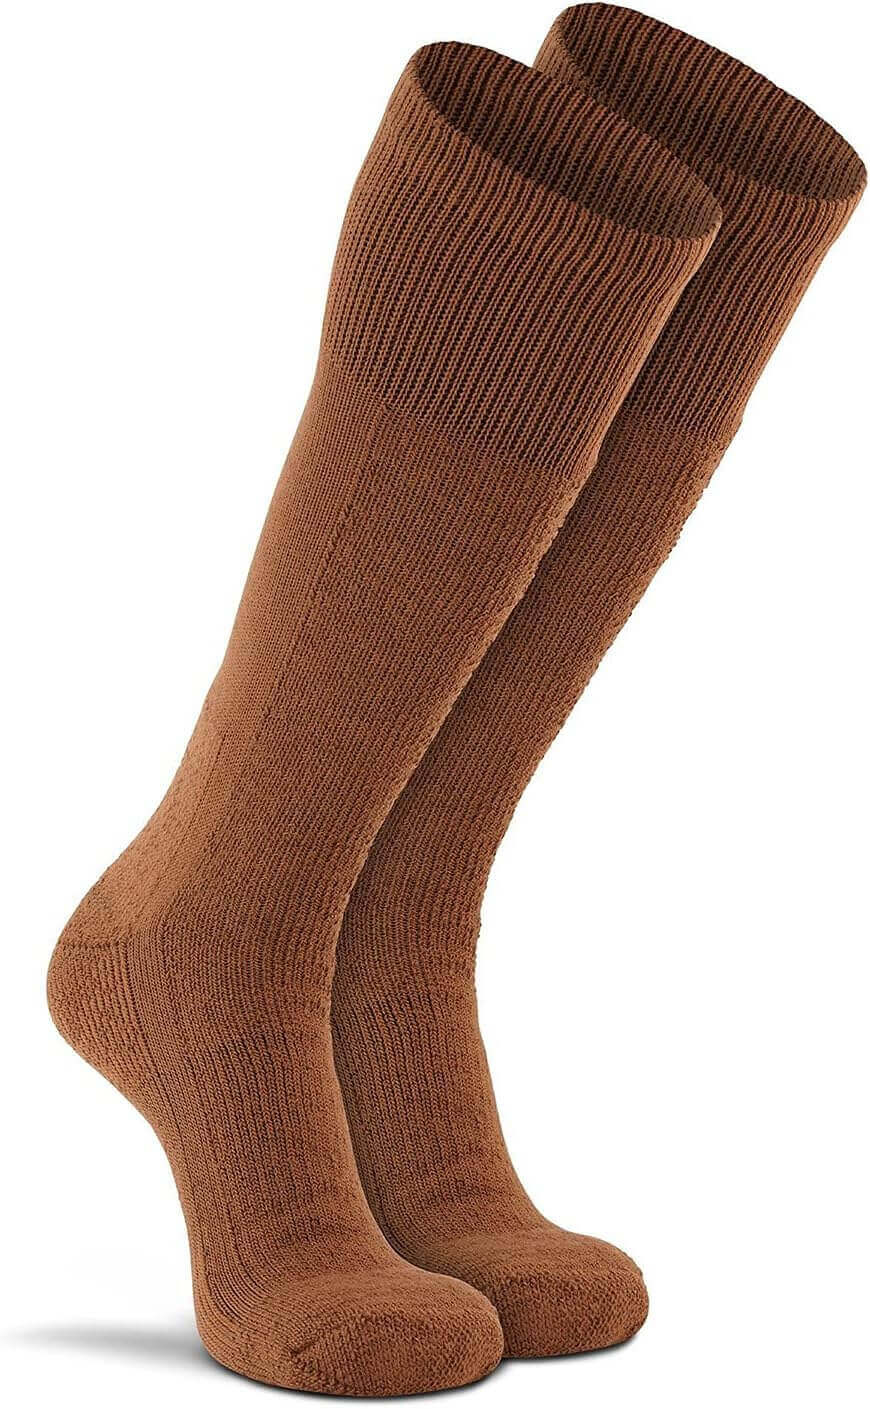 Shop The Latest >Fox River Adult Cold Weather Mid Calf Boot Socks > *Only $17.21*> From The Top Brand > *Fox Riverl* > Shop Now and Get Free Shipping On Orders Over $45.00 >*Shop Earth Foot*